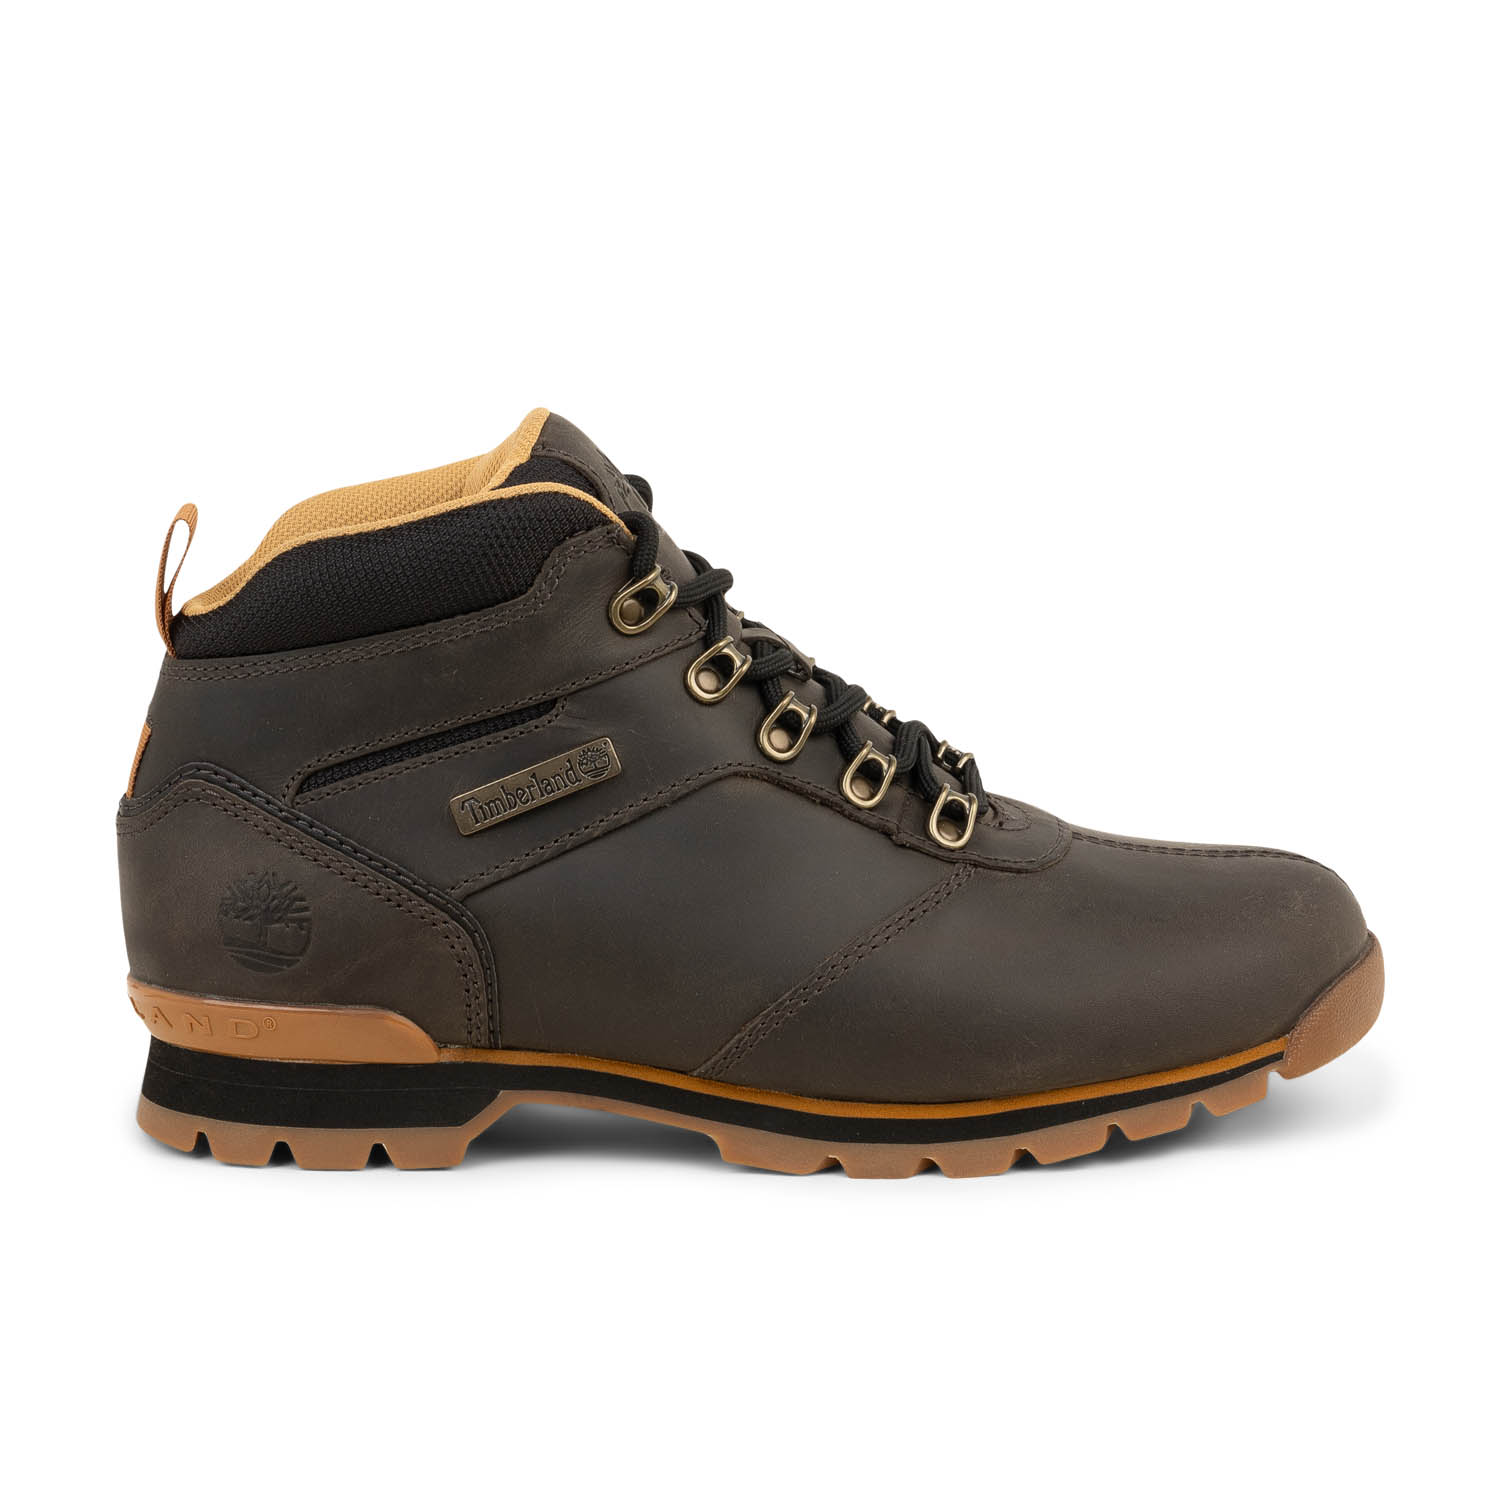 01 - SPLITROCK - TIMBERLAND - Chaussures à lacets - Cuir